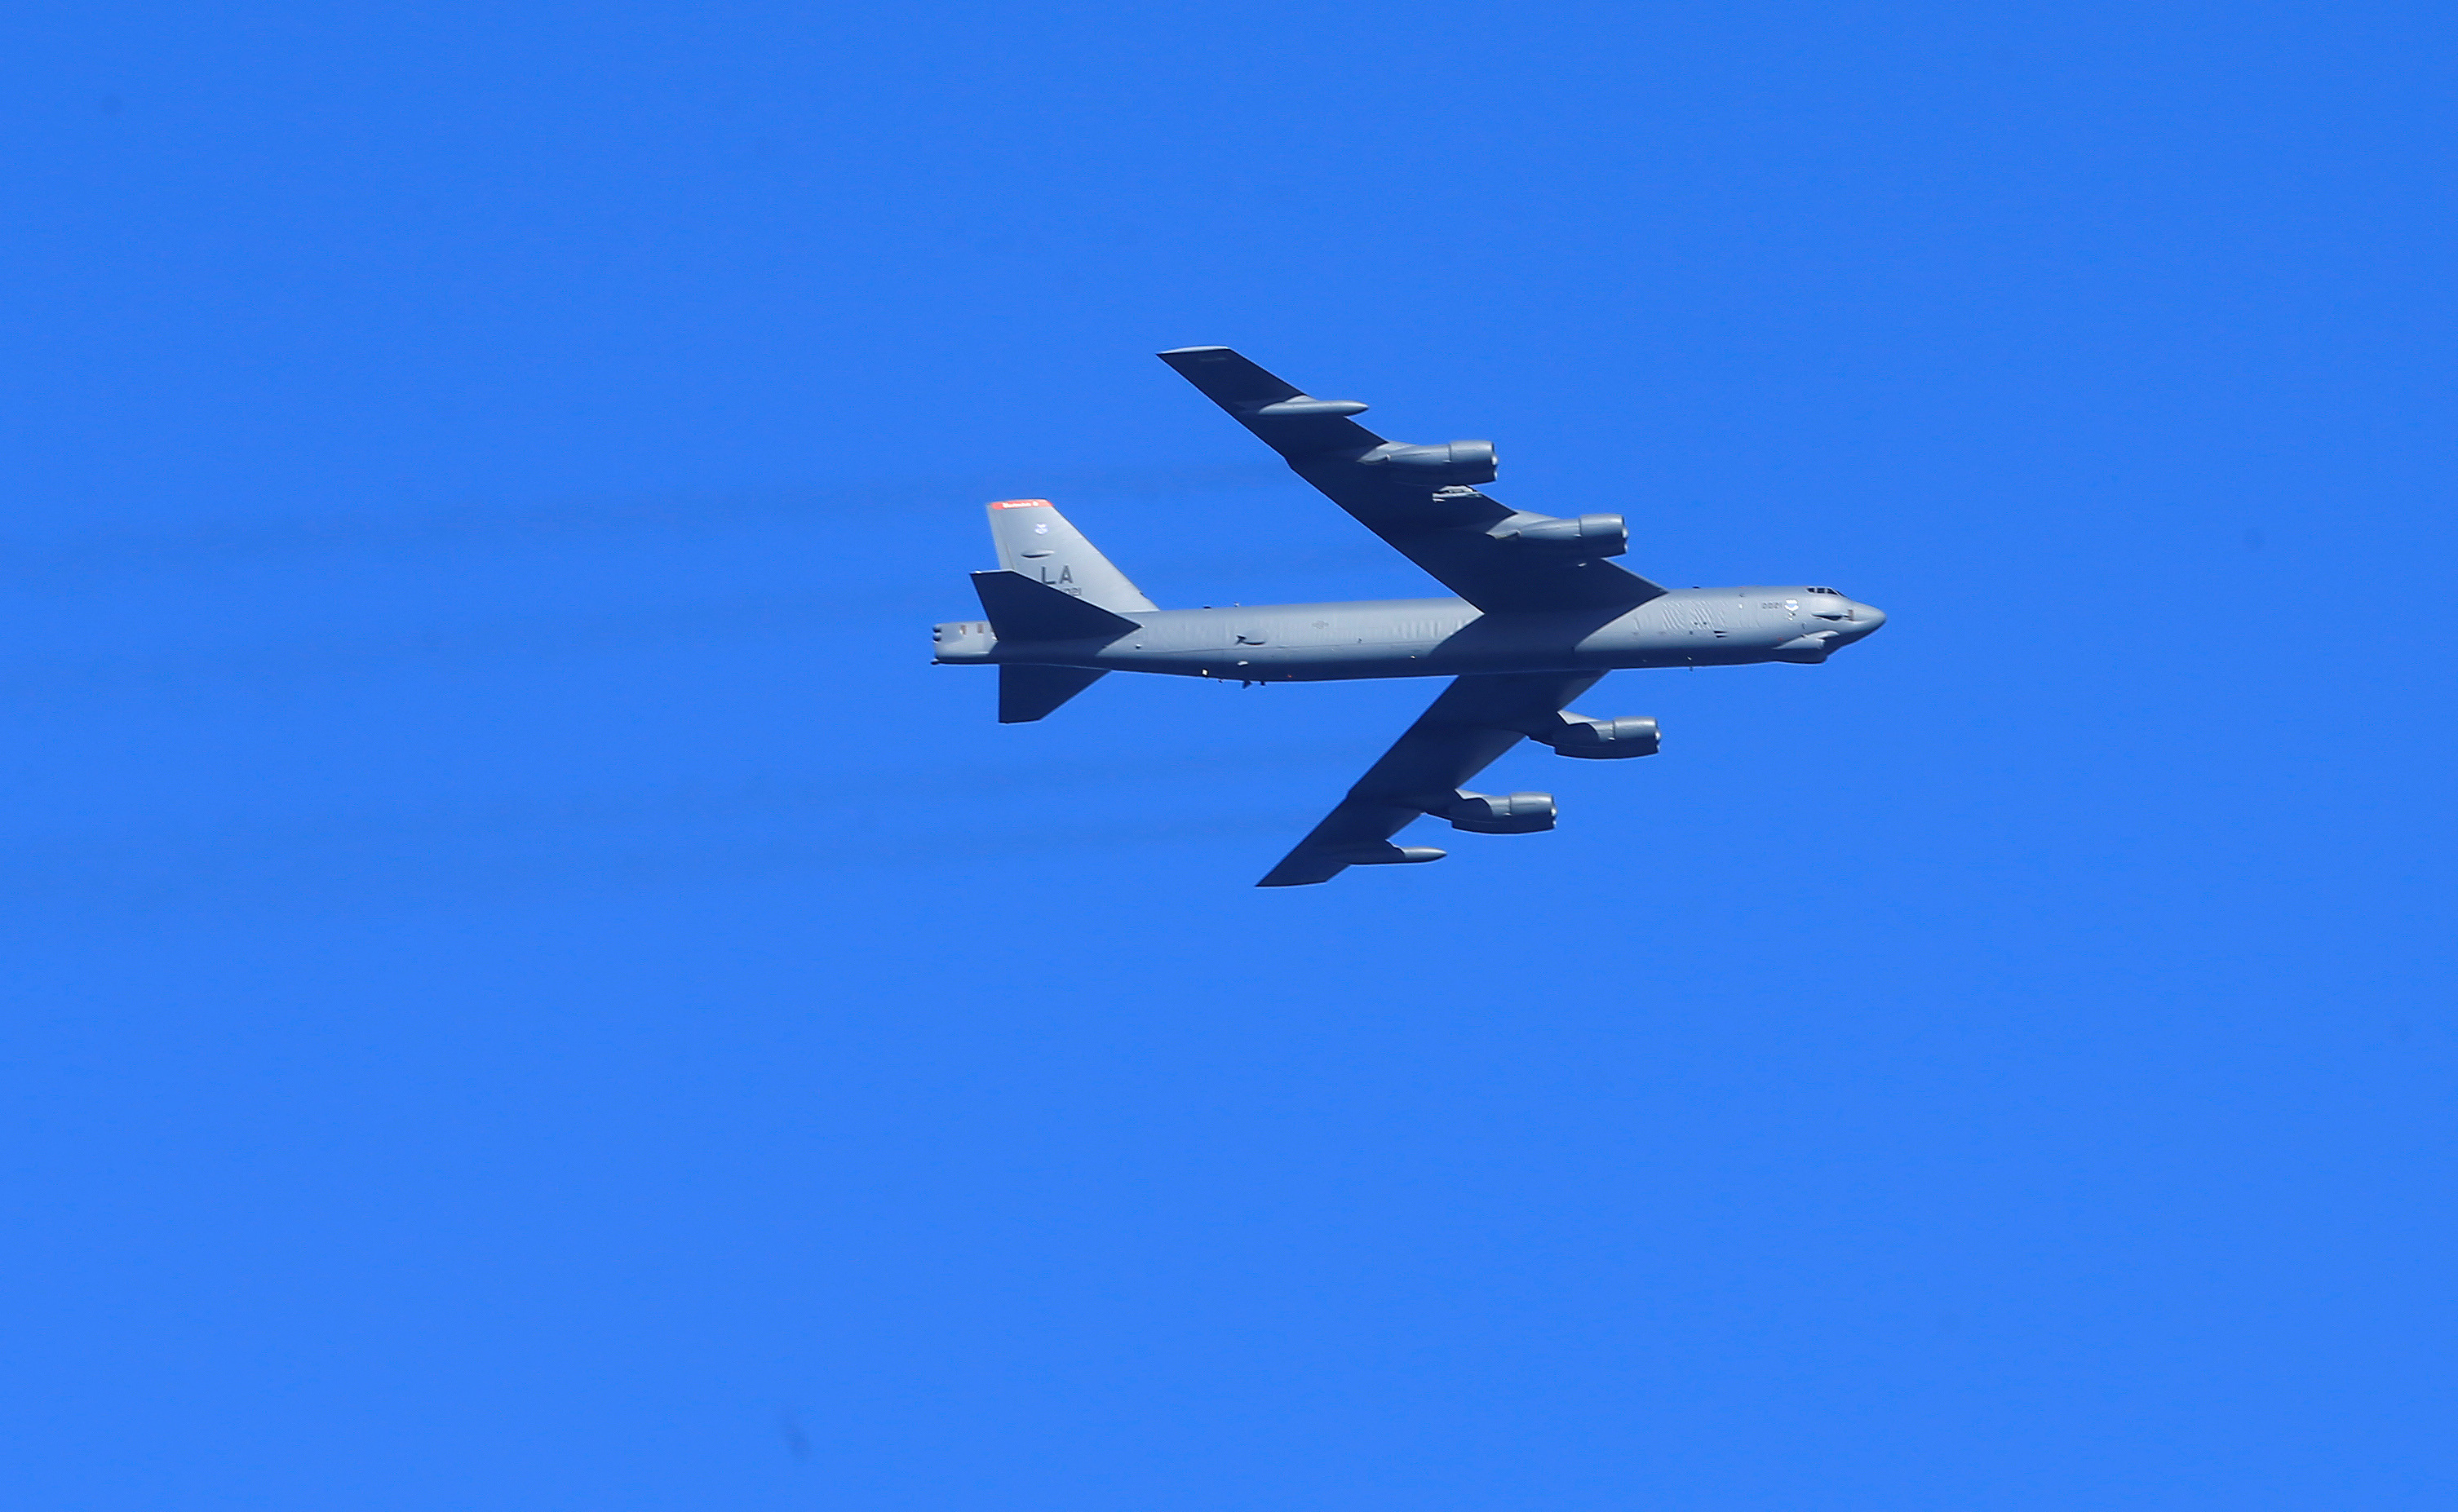 U.S. Air Force B-52 bomber flies during the annual recurring multinational, maritime-focused NATO exercise BALTOPS 2017 near Ventspils